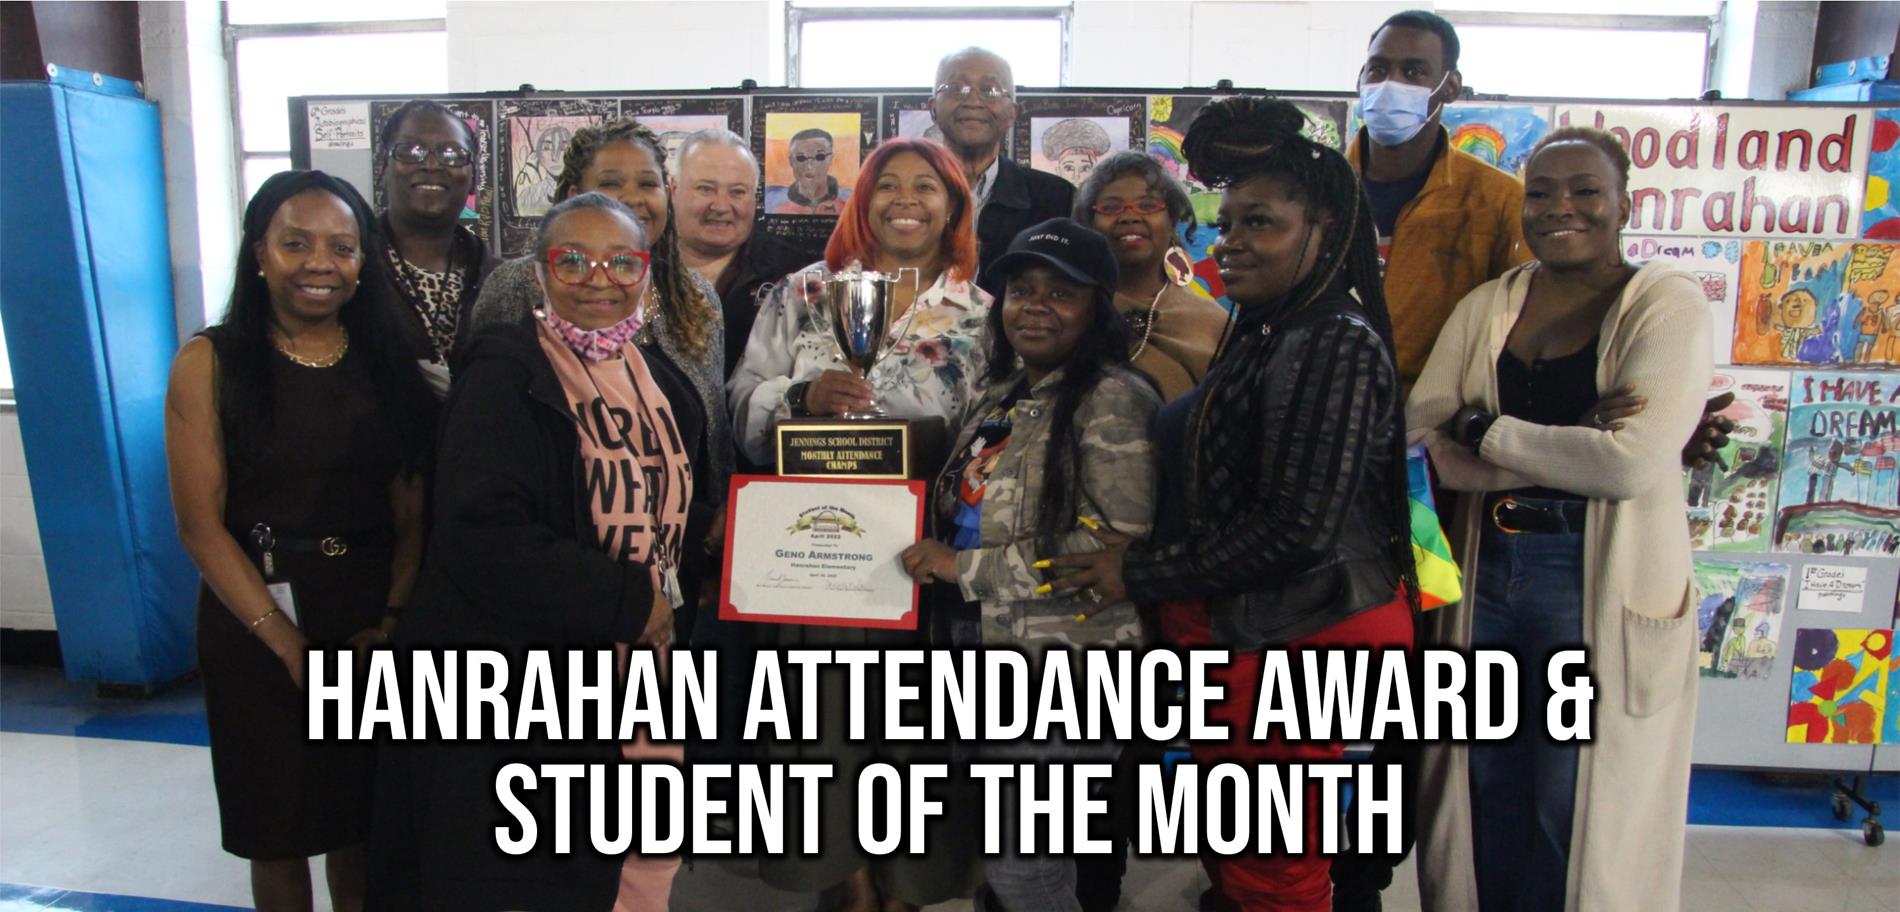 attendance award and student of the month